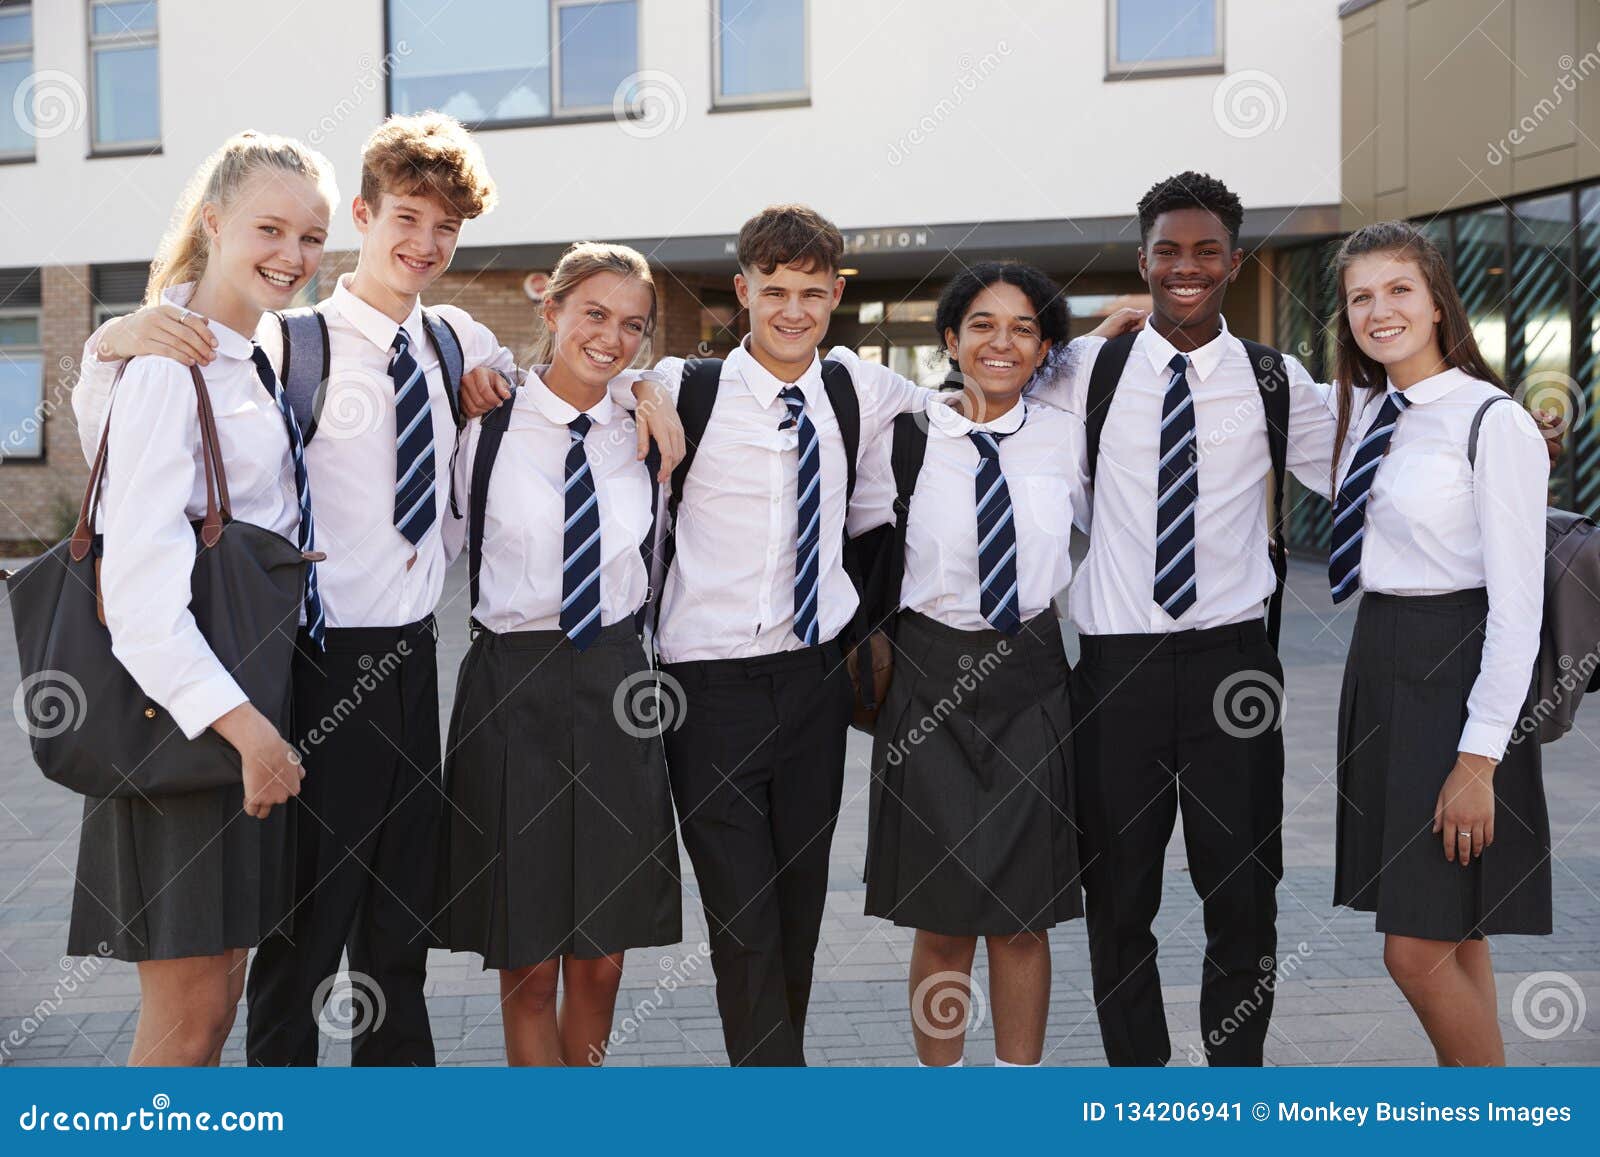 portrait of smiling male and female high school students wearing uniform outside college building